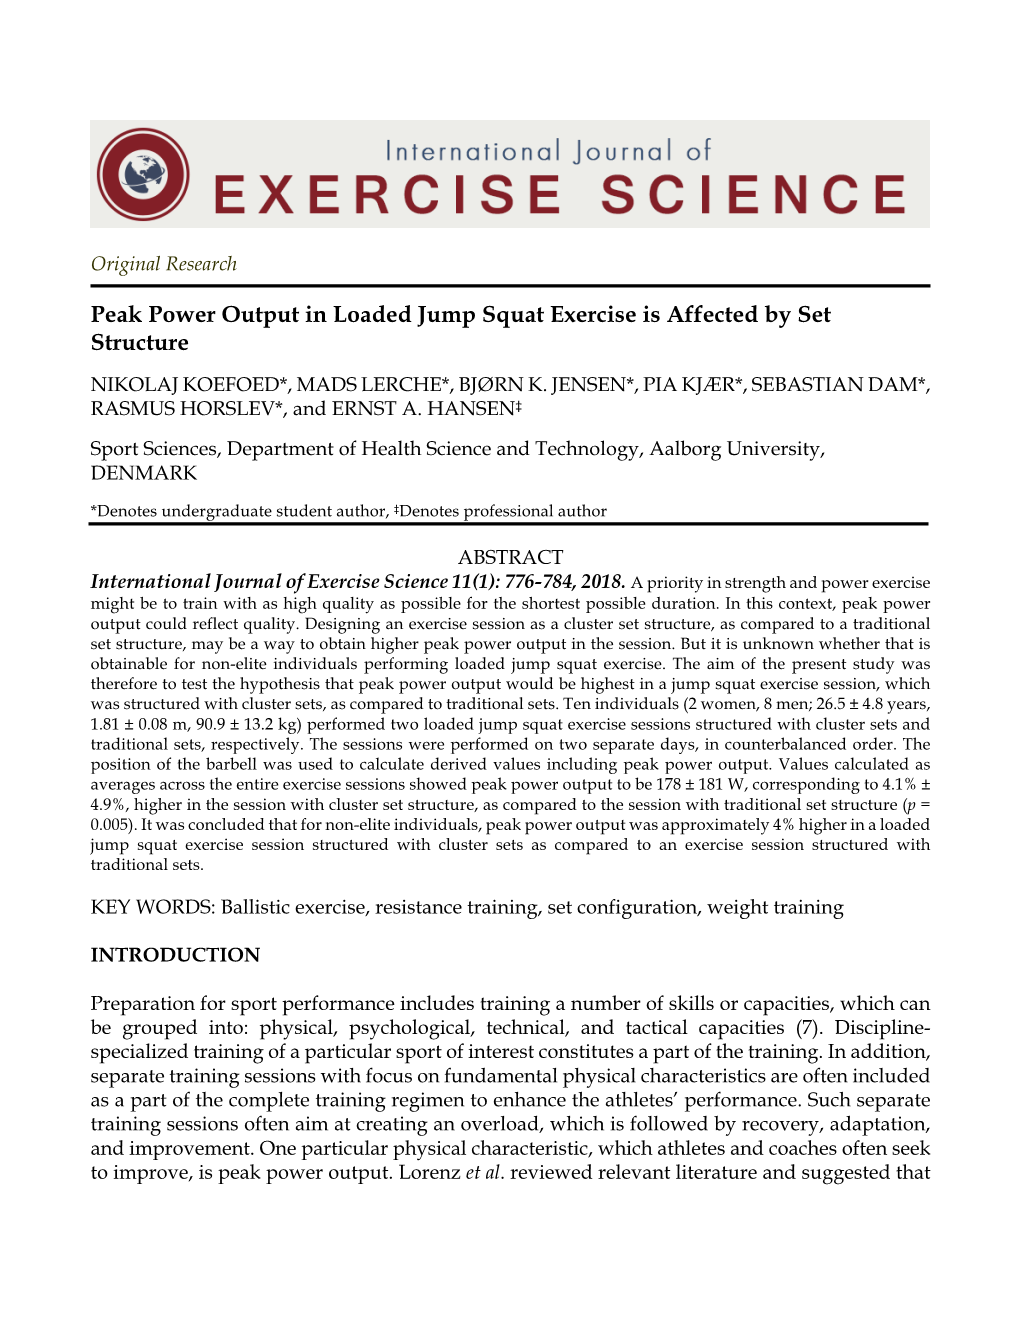 Peak Power Output in Loaded Jump Squat Exercise Is Affected by Set Structure